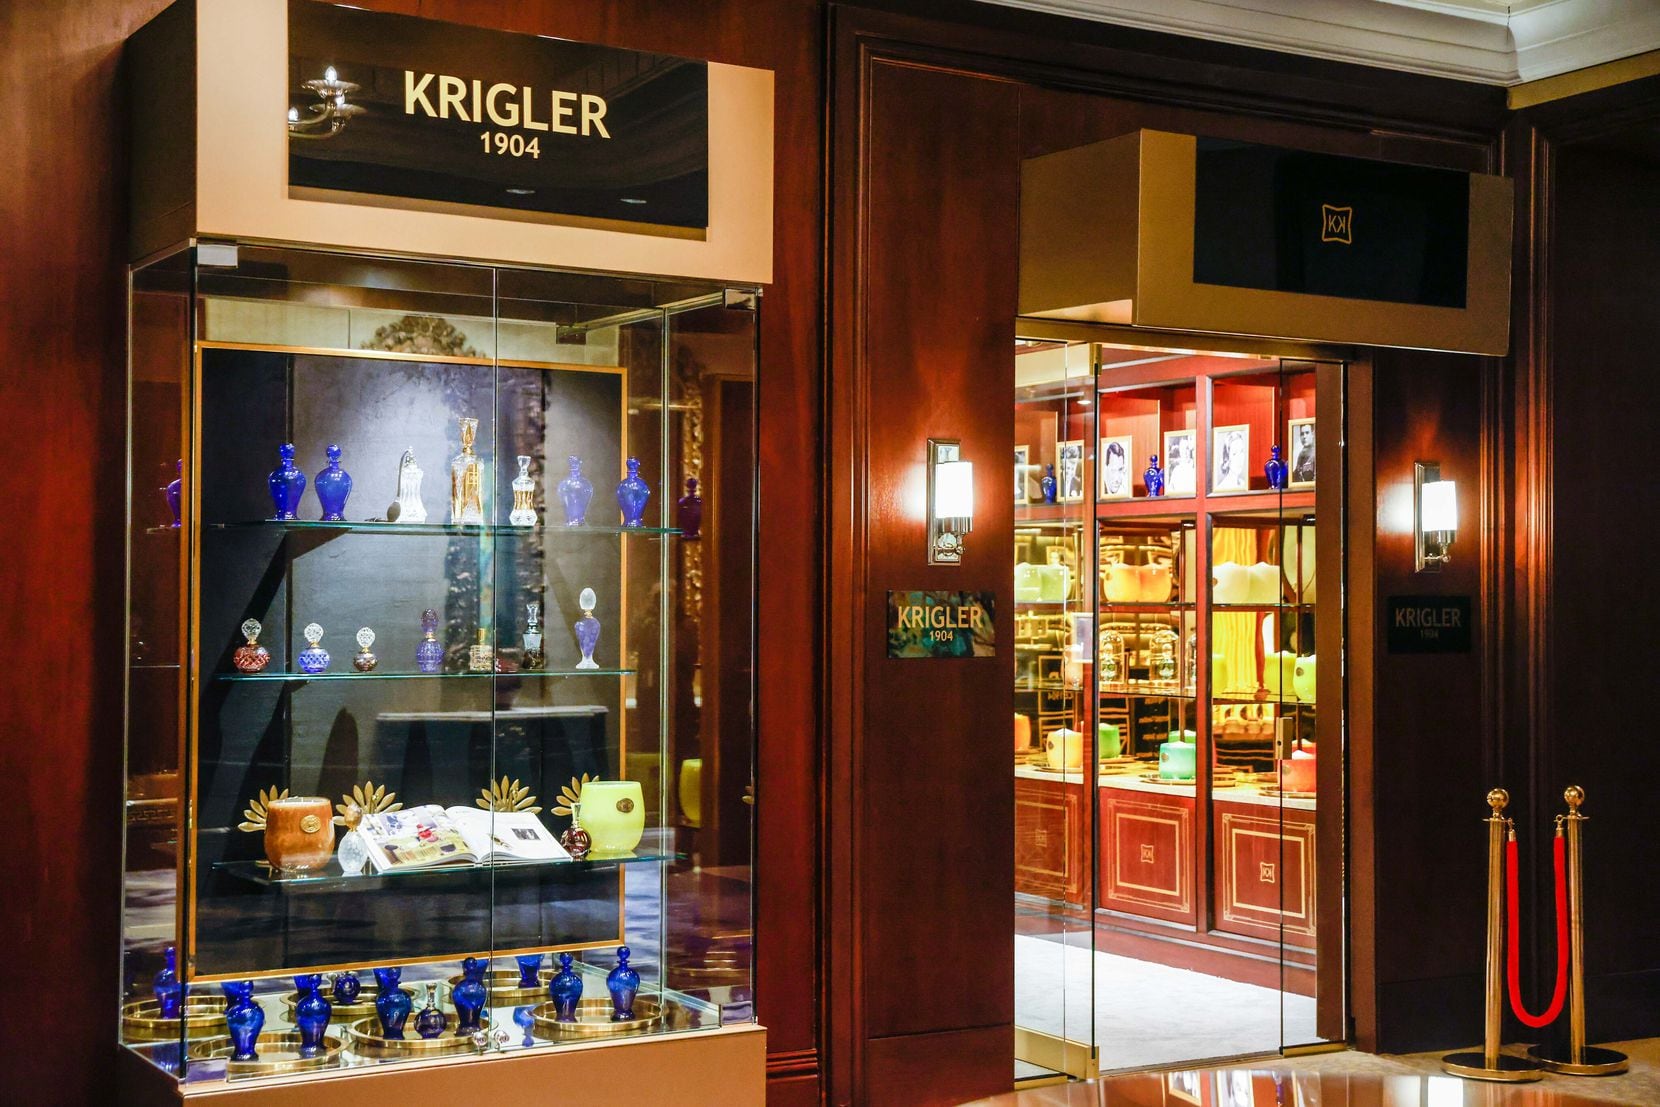 Krigler is known globally for producing some of the most coveted fragrances. 